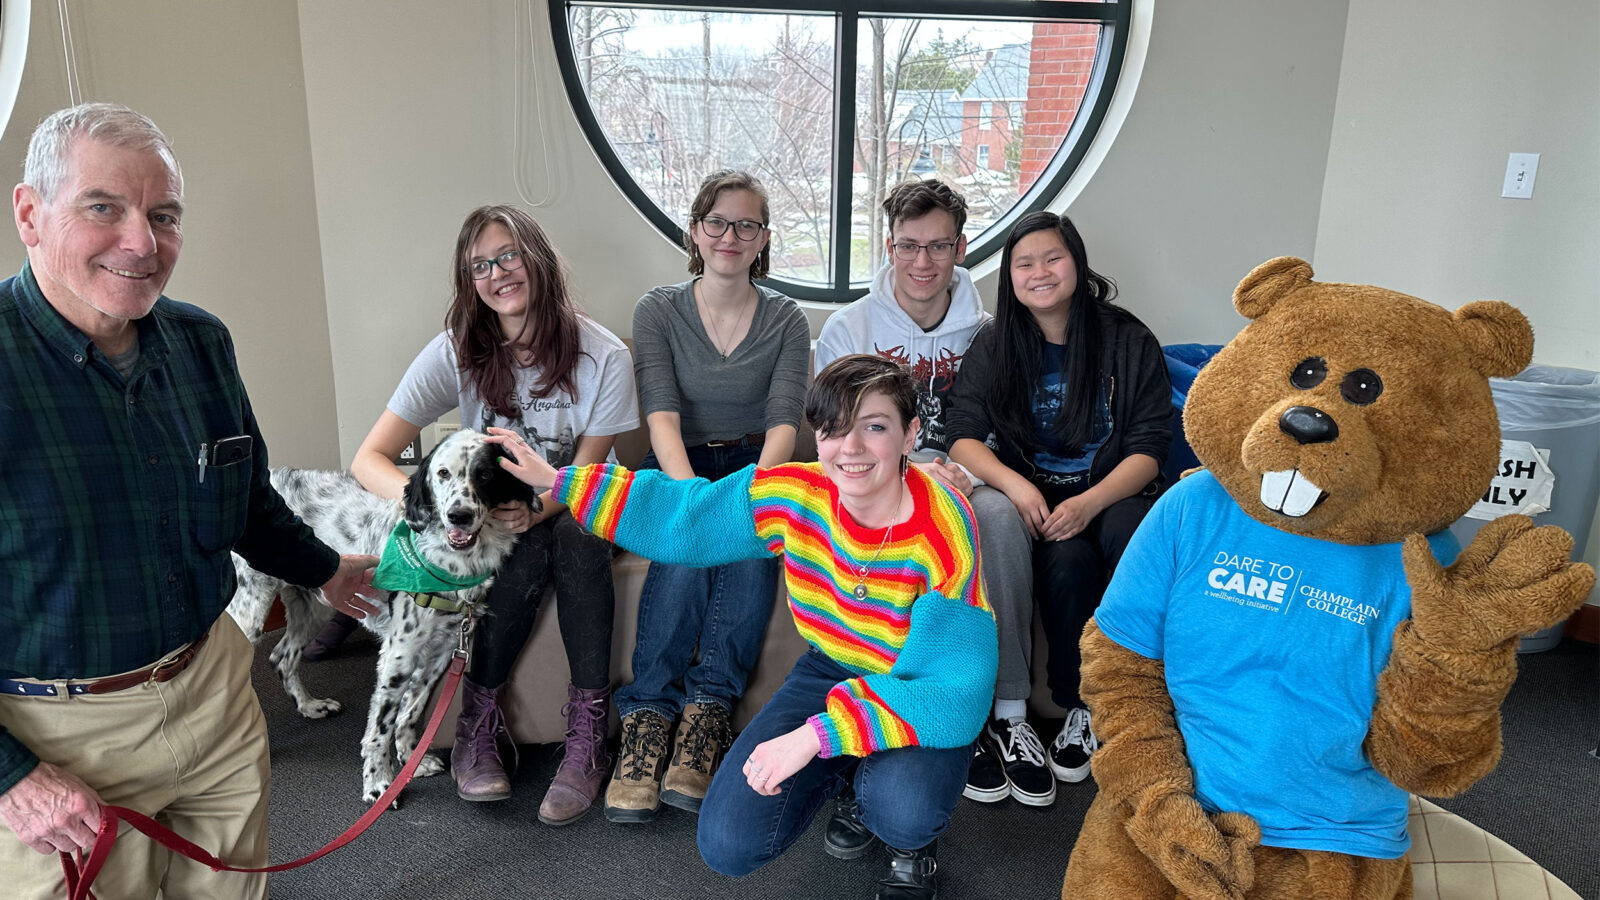 five students pose with Chauncey, a therapy dog, and the therapy dog's owner. the dog is white and black spotted.